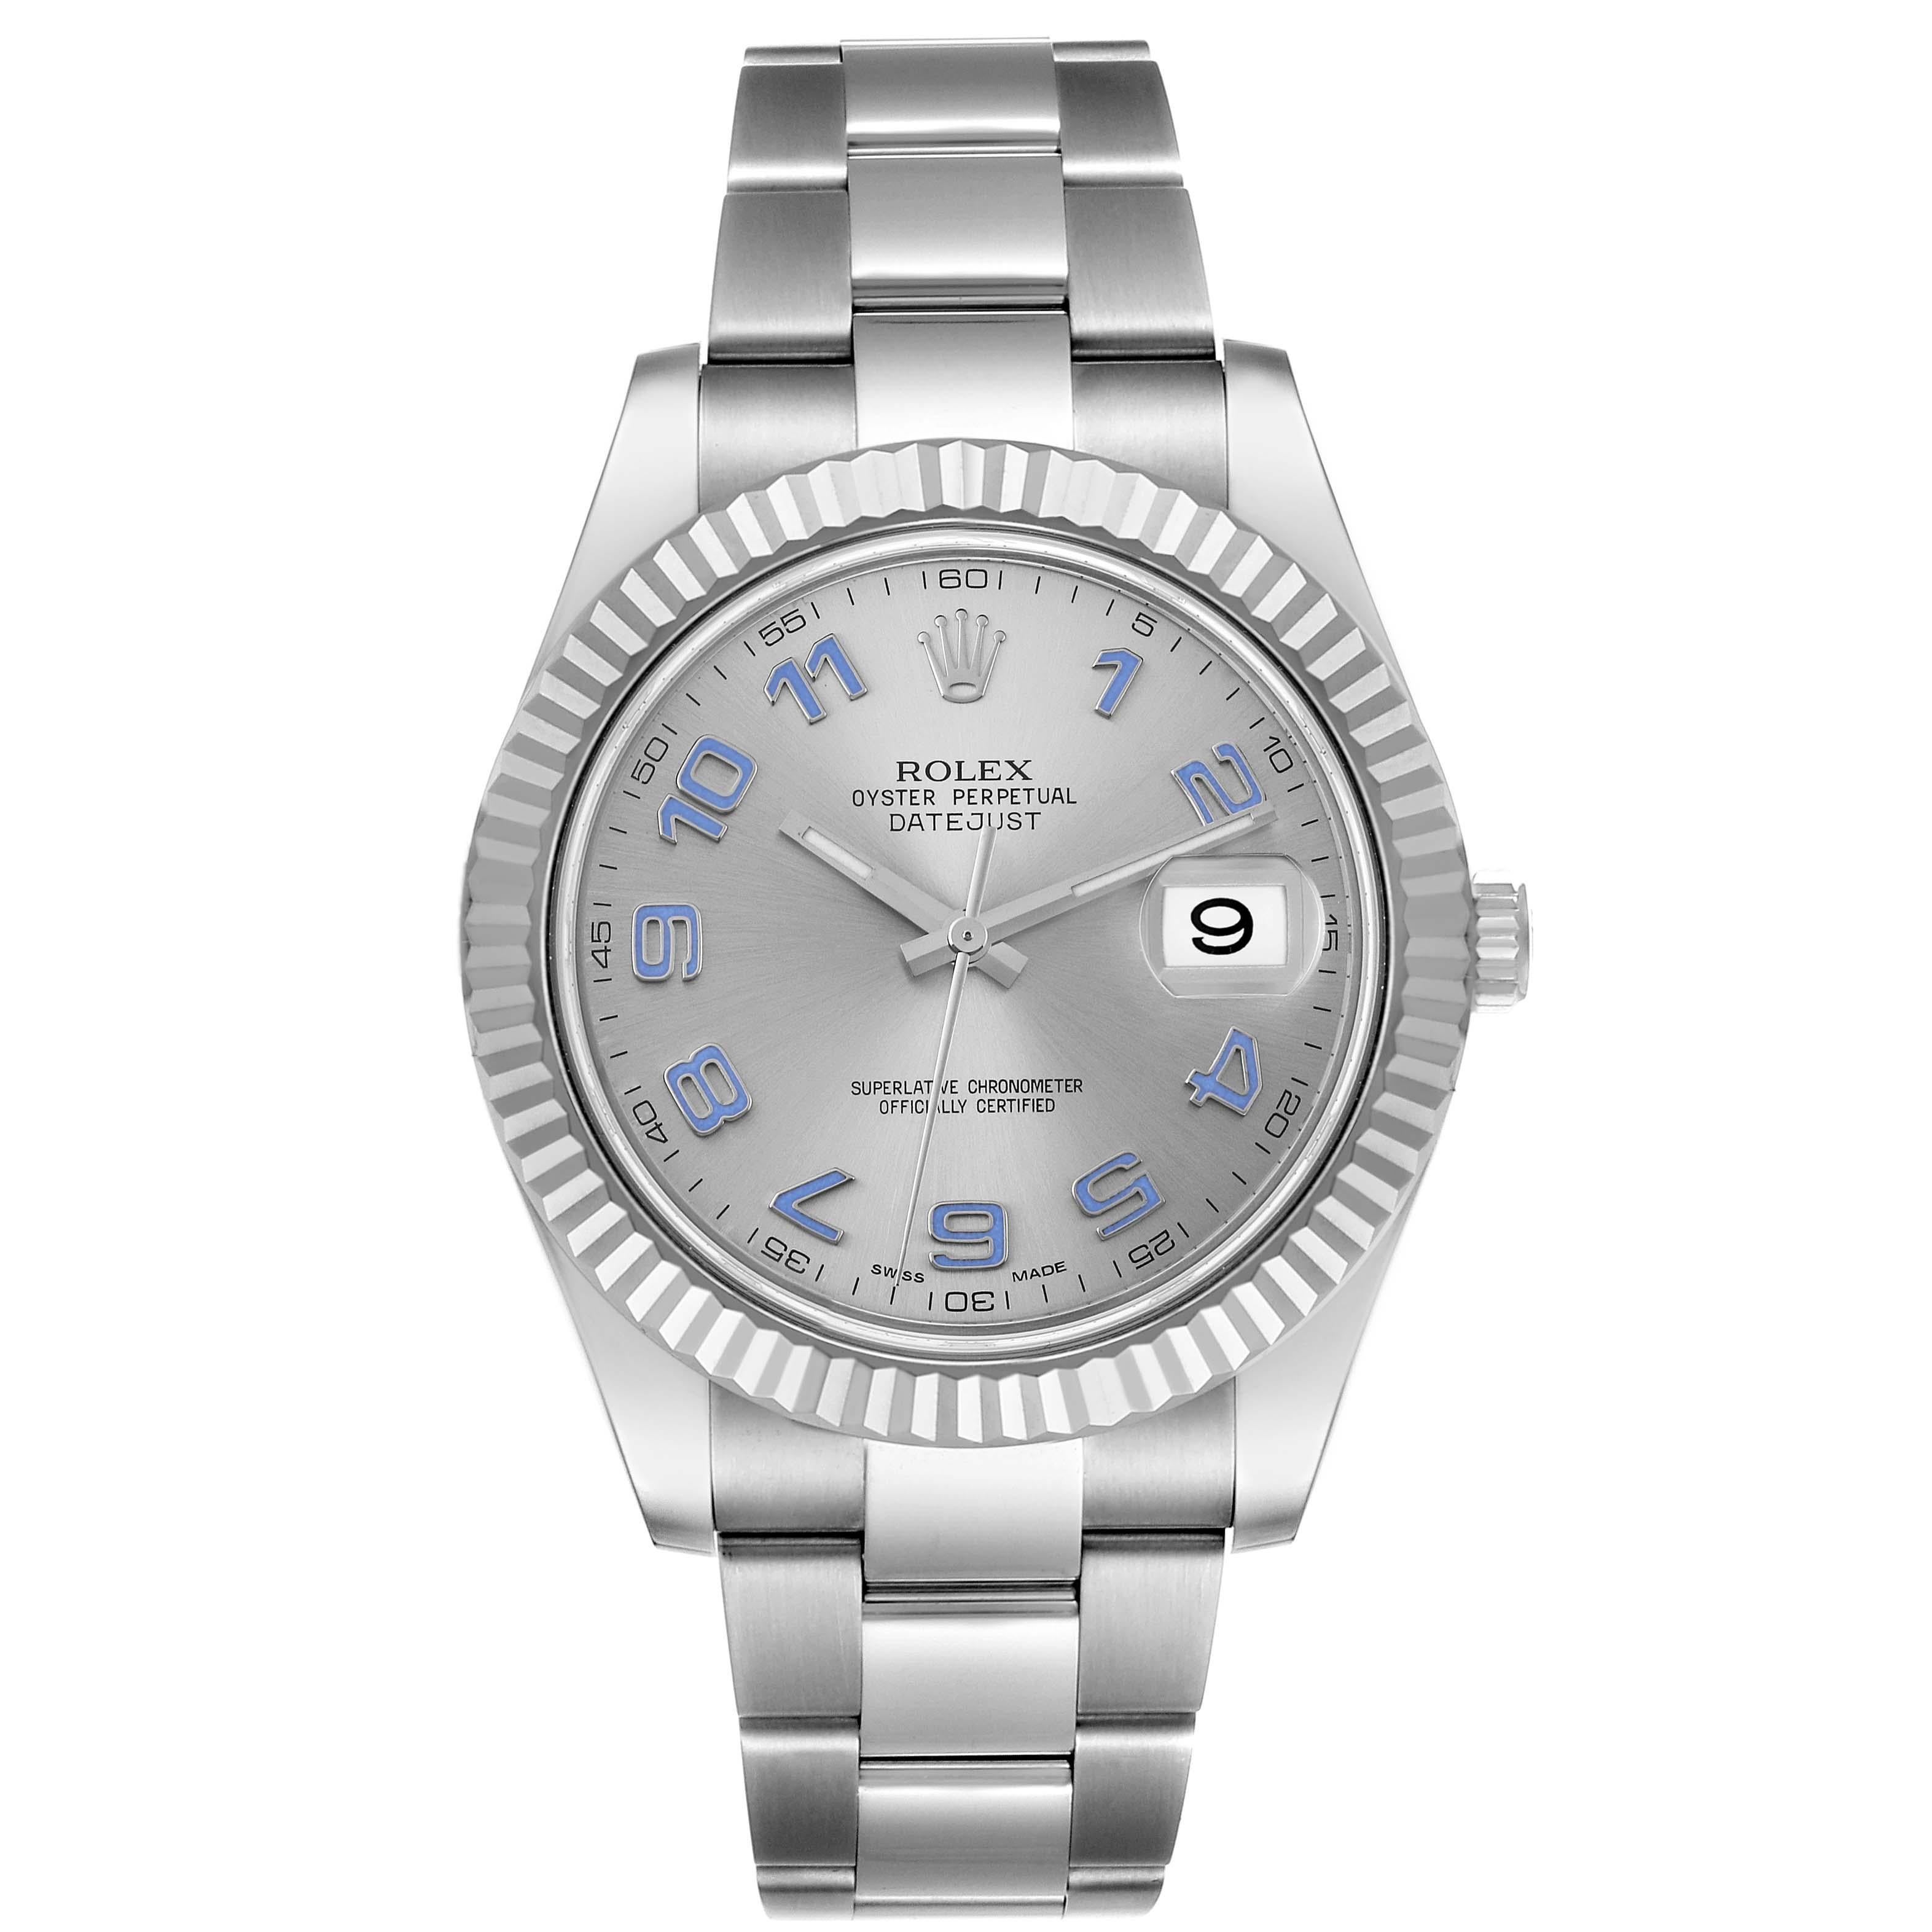 Rolex Datejust II 41mm Steel White Gold Blue Numerals Mens Watch 116334. Officially certified chronometer self-winding movement. Stainless steel case 41.0 mm in diameter. Rolex logo on a crown. 18K white gold fluted bezel. Scratch resistant sapphire